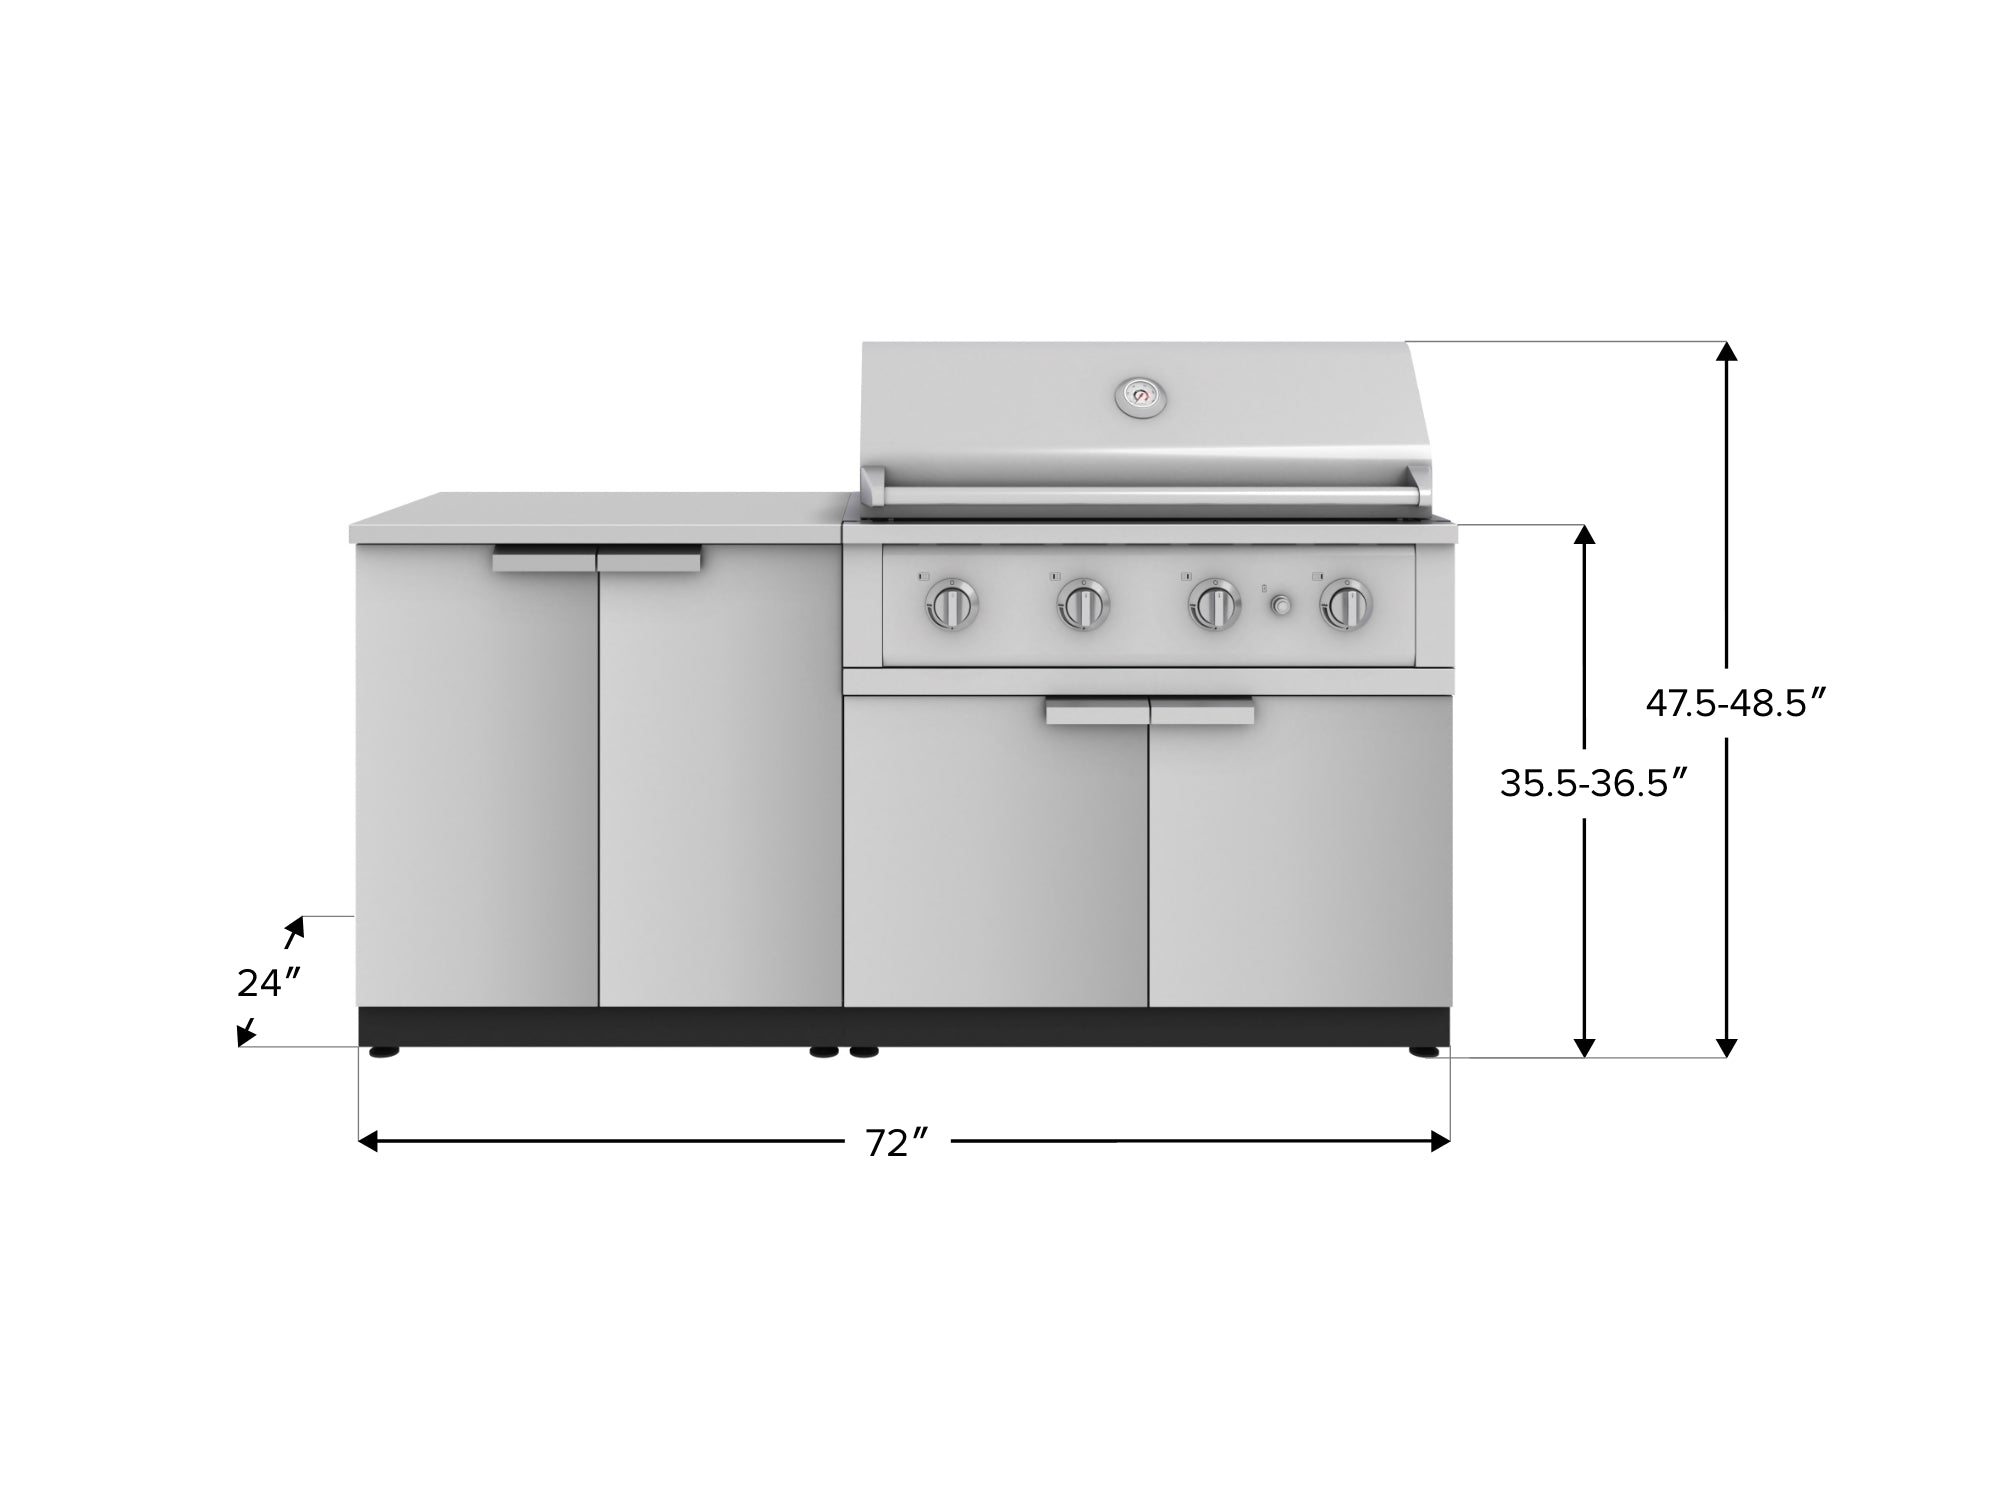 Outdoor Kitchen Stainless Steel 4 Piece Cabinet Set with 2 Door, Grill Cabinet, Performance Grill and Countertop